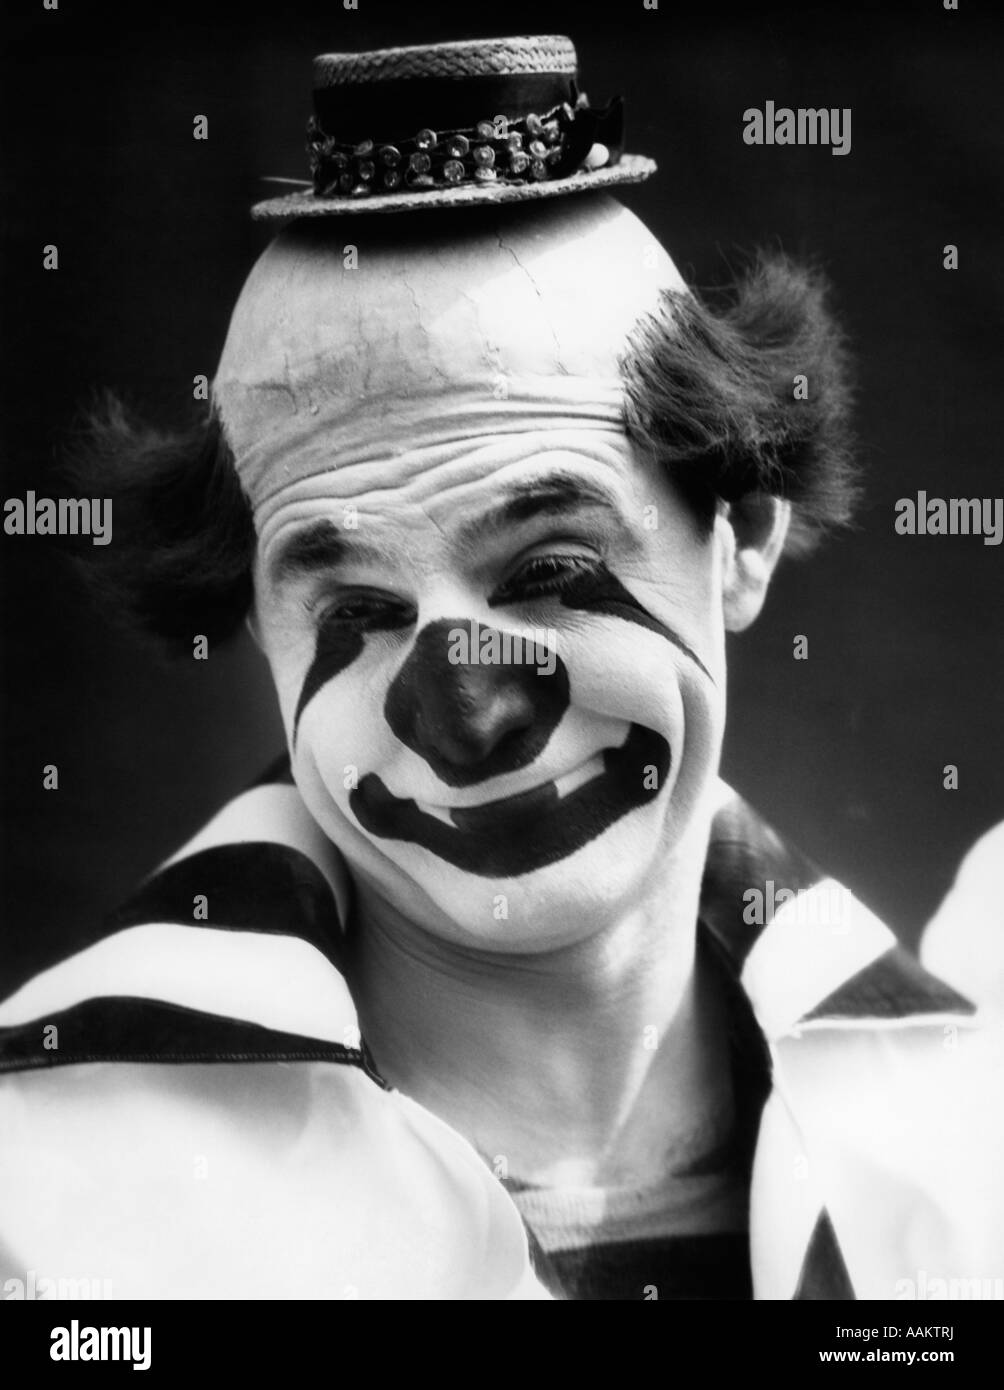 1930s CLOWN IN CLASSIC WHITEFACE WITH A HAPPY SAD FACE WITH A BALD HEAD WEARING A TINY STRAW HAT LOOKING AT CAMERA Stock Photo